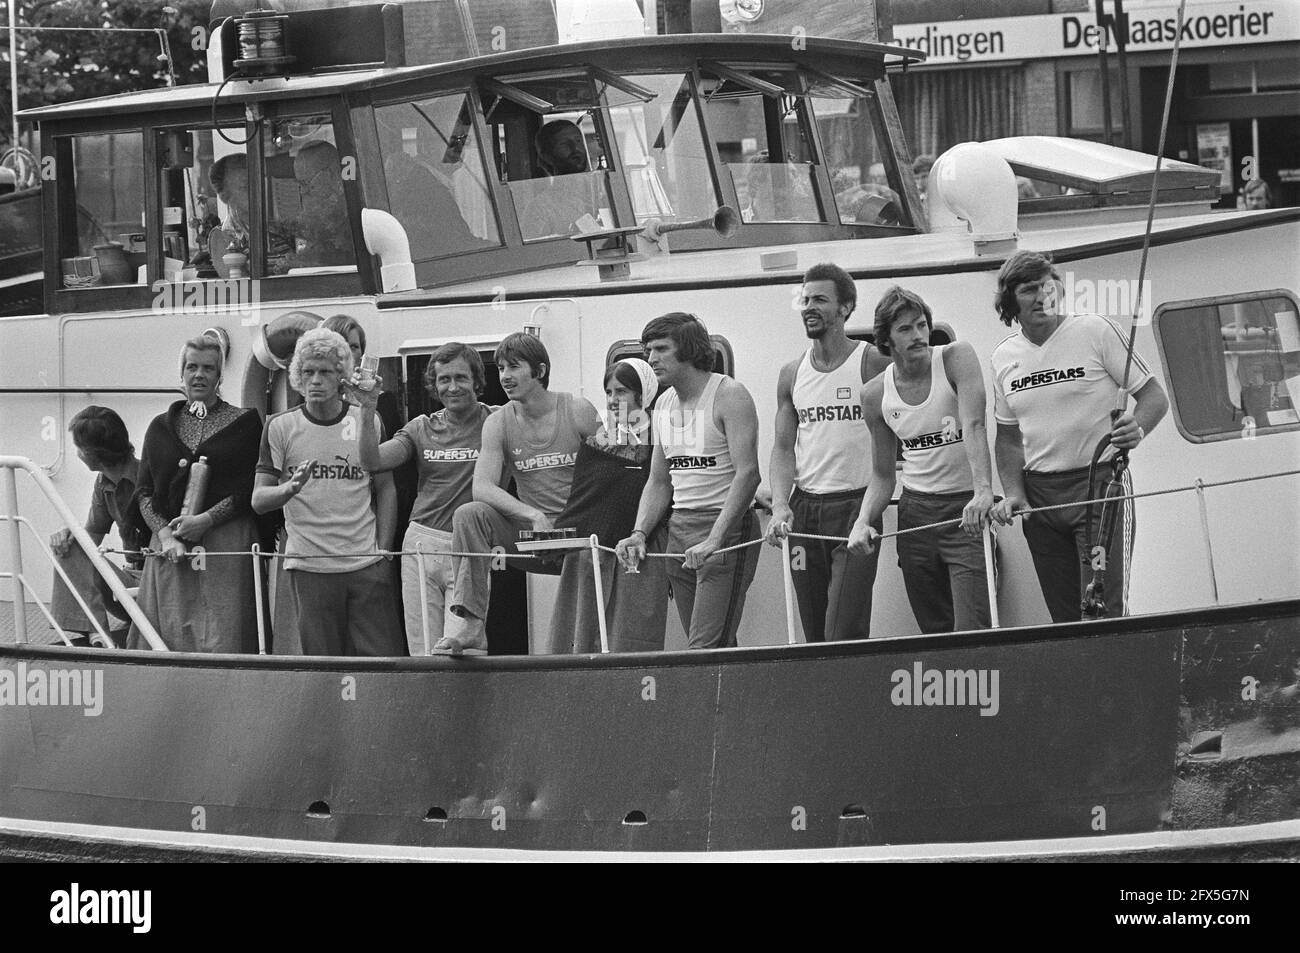 Recordings Superstar of the AVRO in Vlaardingen, various Superstars on board ship, August 4, 1976, The Netherlands, 20th century press agency photo, news to remember, documentary, historic photography 1945-1990, visual stories, human history of the Twentieth Century, capturing moments in time Stock Photo